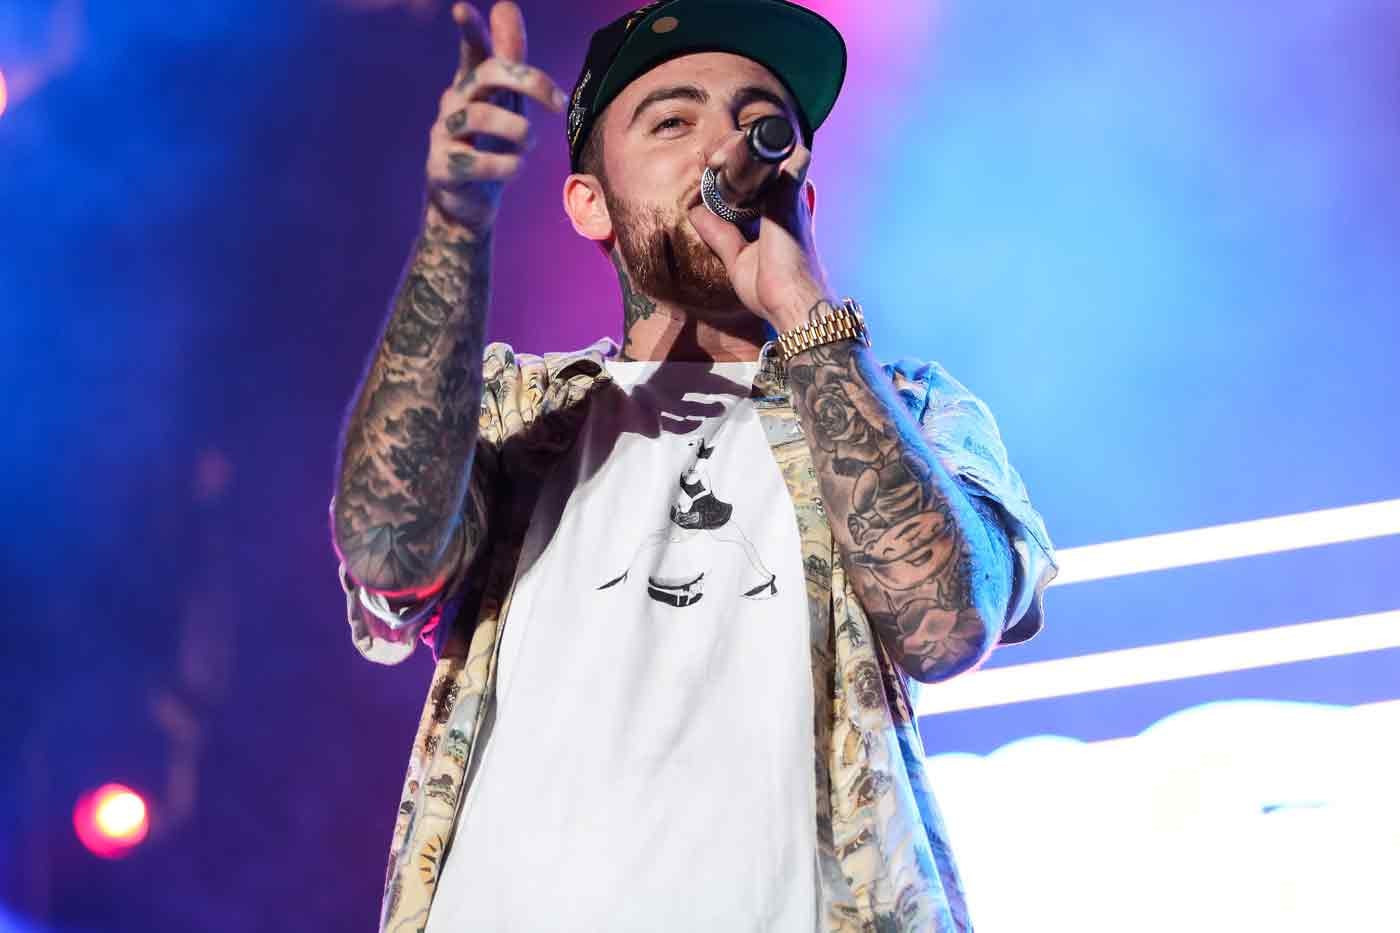 Watch Mac Miller Get Compared to Vanilla Ice on 'The Nightly Show'